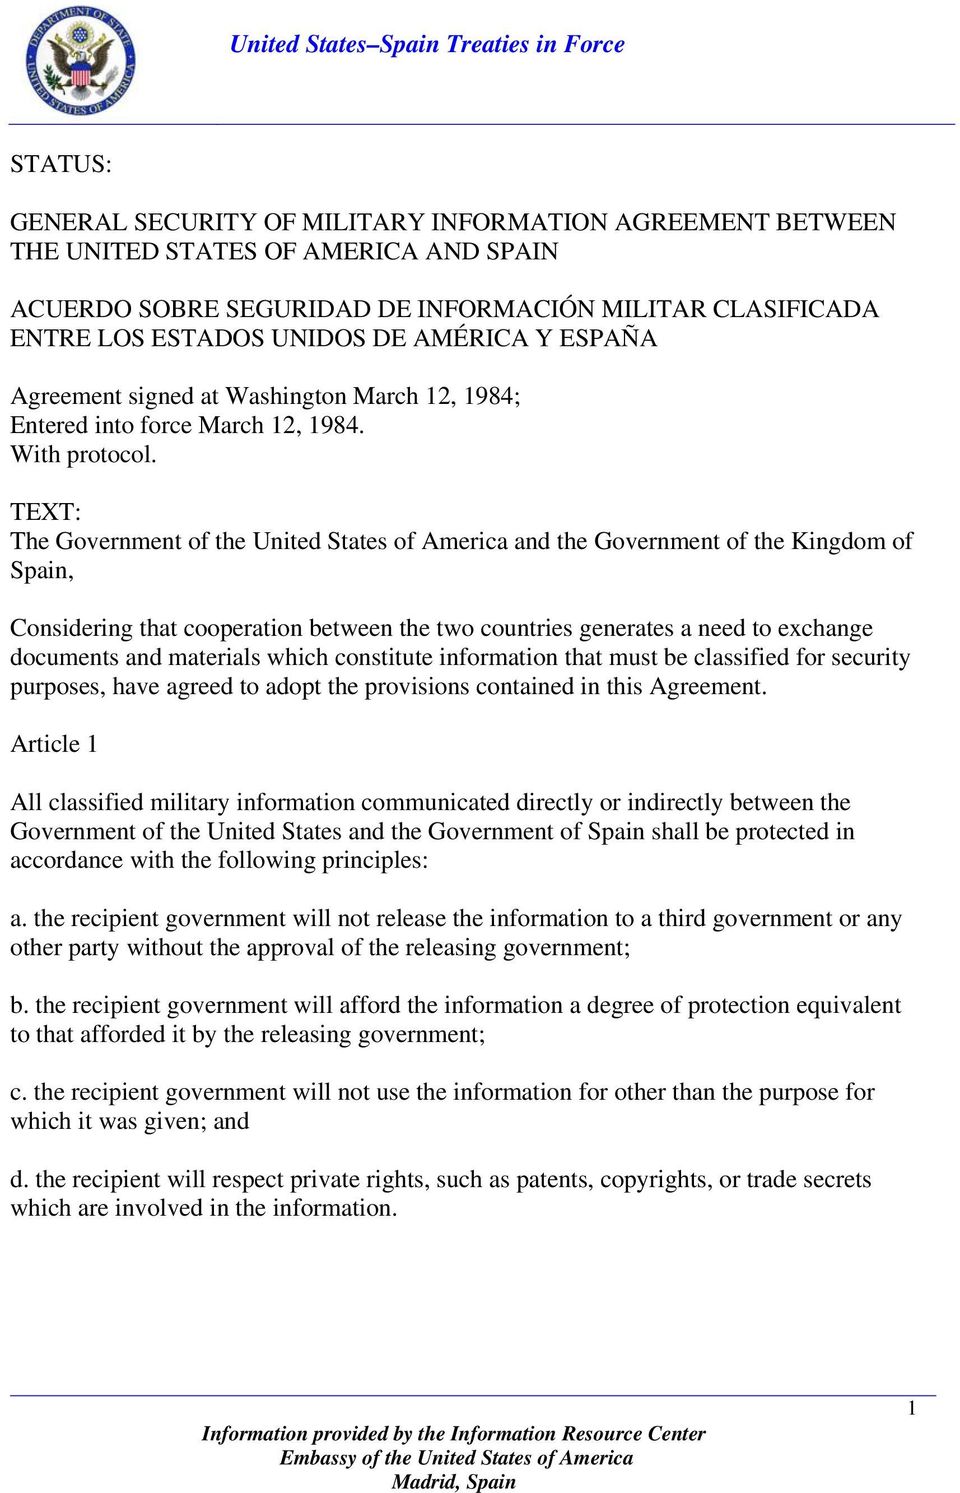 TEXT: The Government of the United States of America and the Government of the Kingdom of Spain, Considering that cooperation between the two countries generates a need to exchange documents and